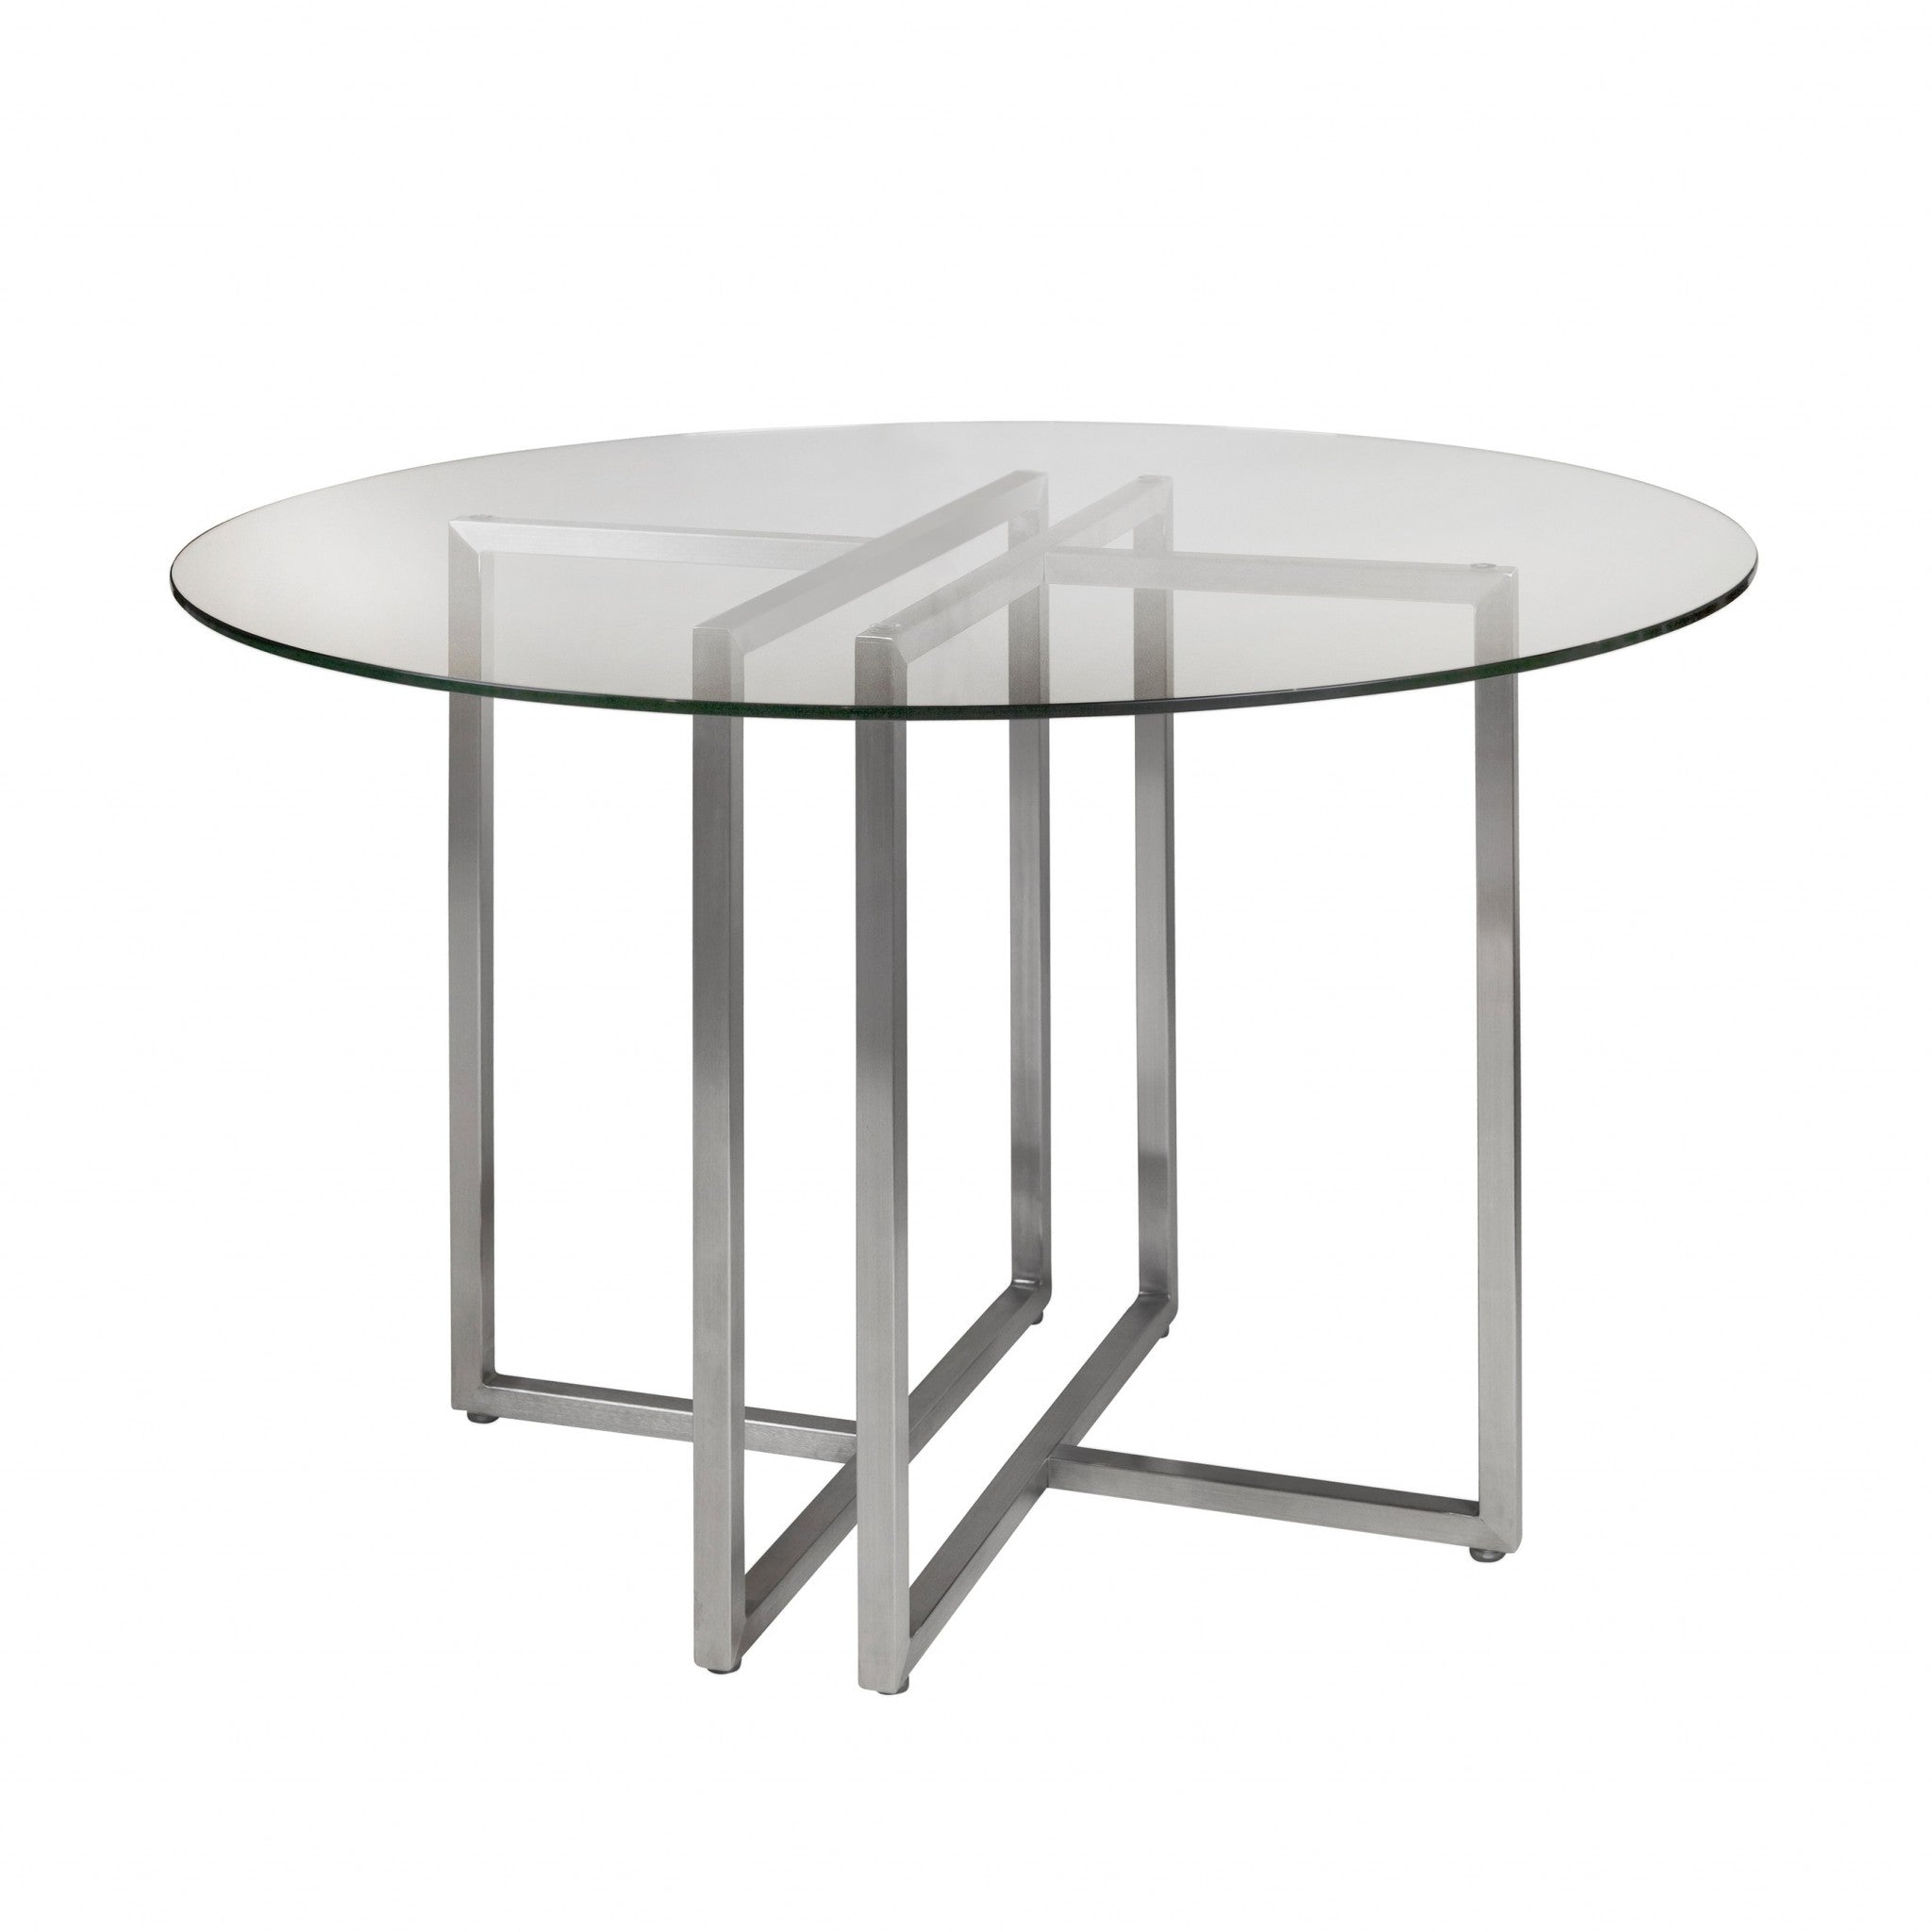 42" Glass Top Stainless Geo Base Round Dining Table